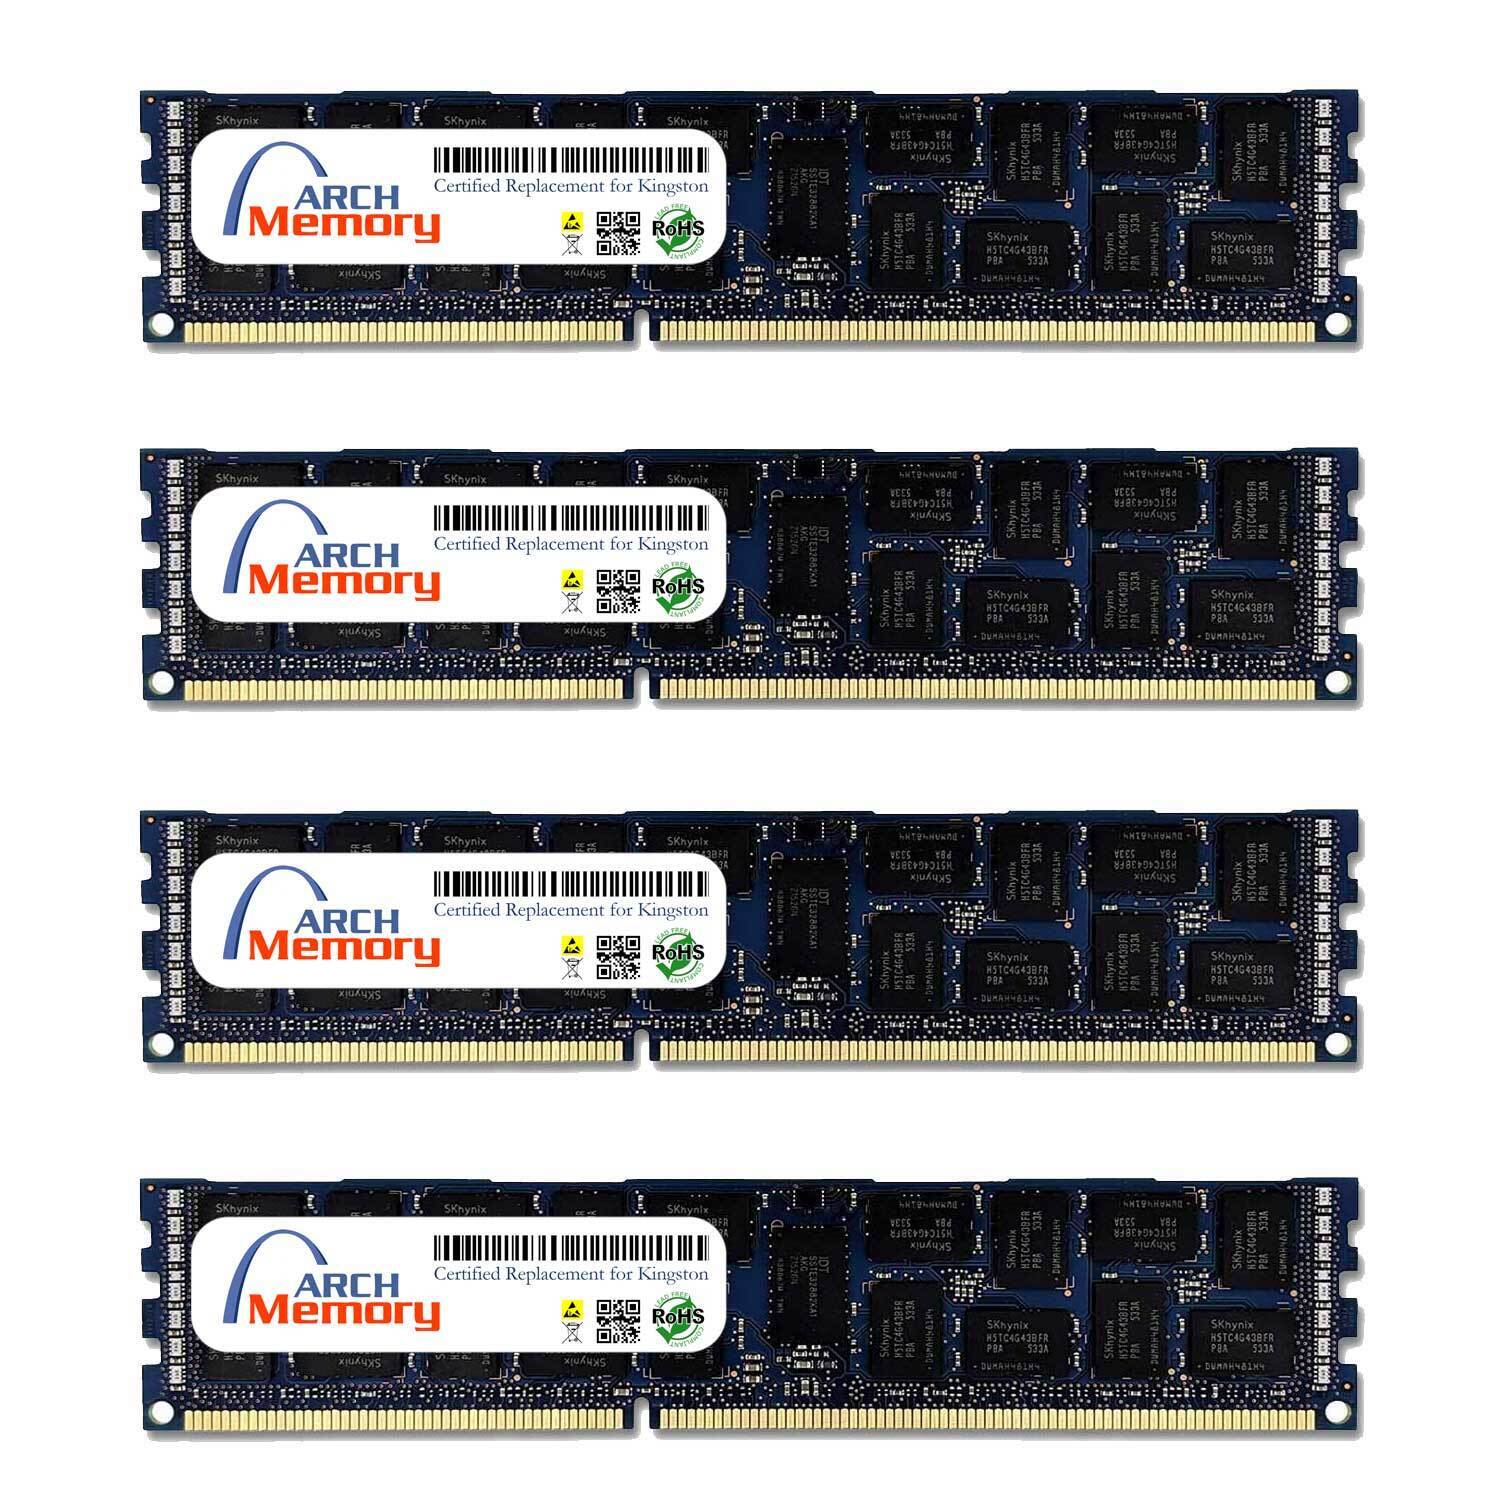 Arch Memory KTH-PL316K4/64G 16GB Replacement for Kingston DDR3 RDIMM Server RAM